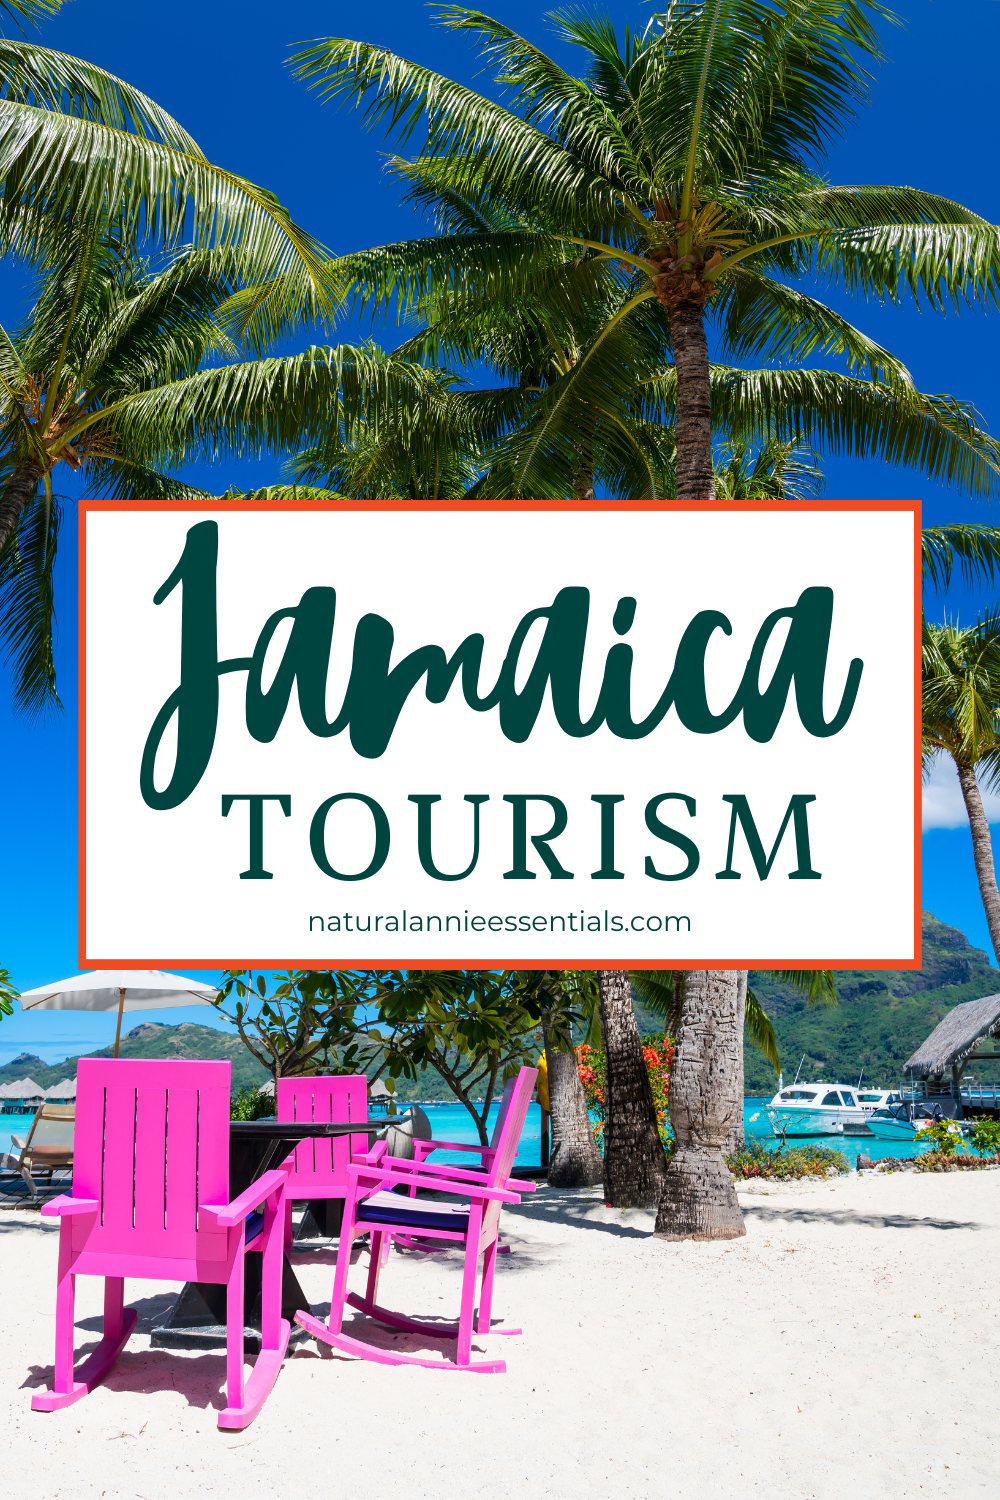 TOURISM IN JAMAICA AND SOUVINER